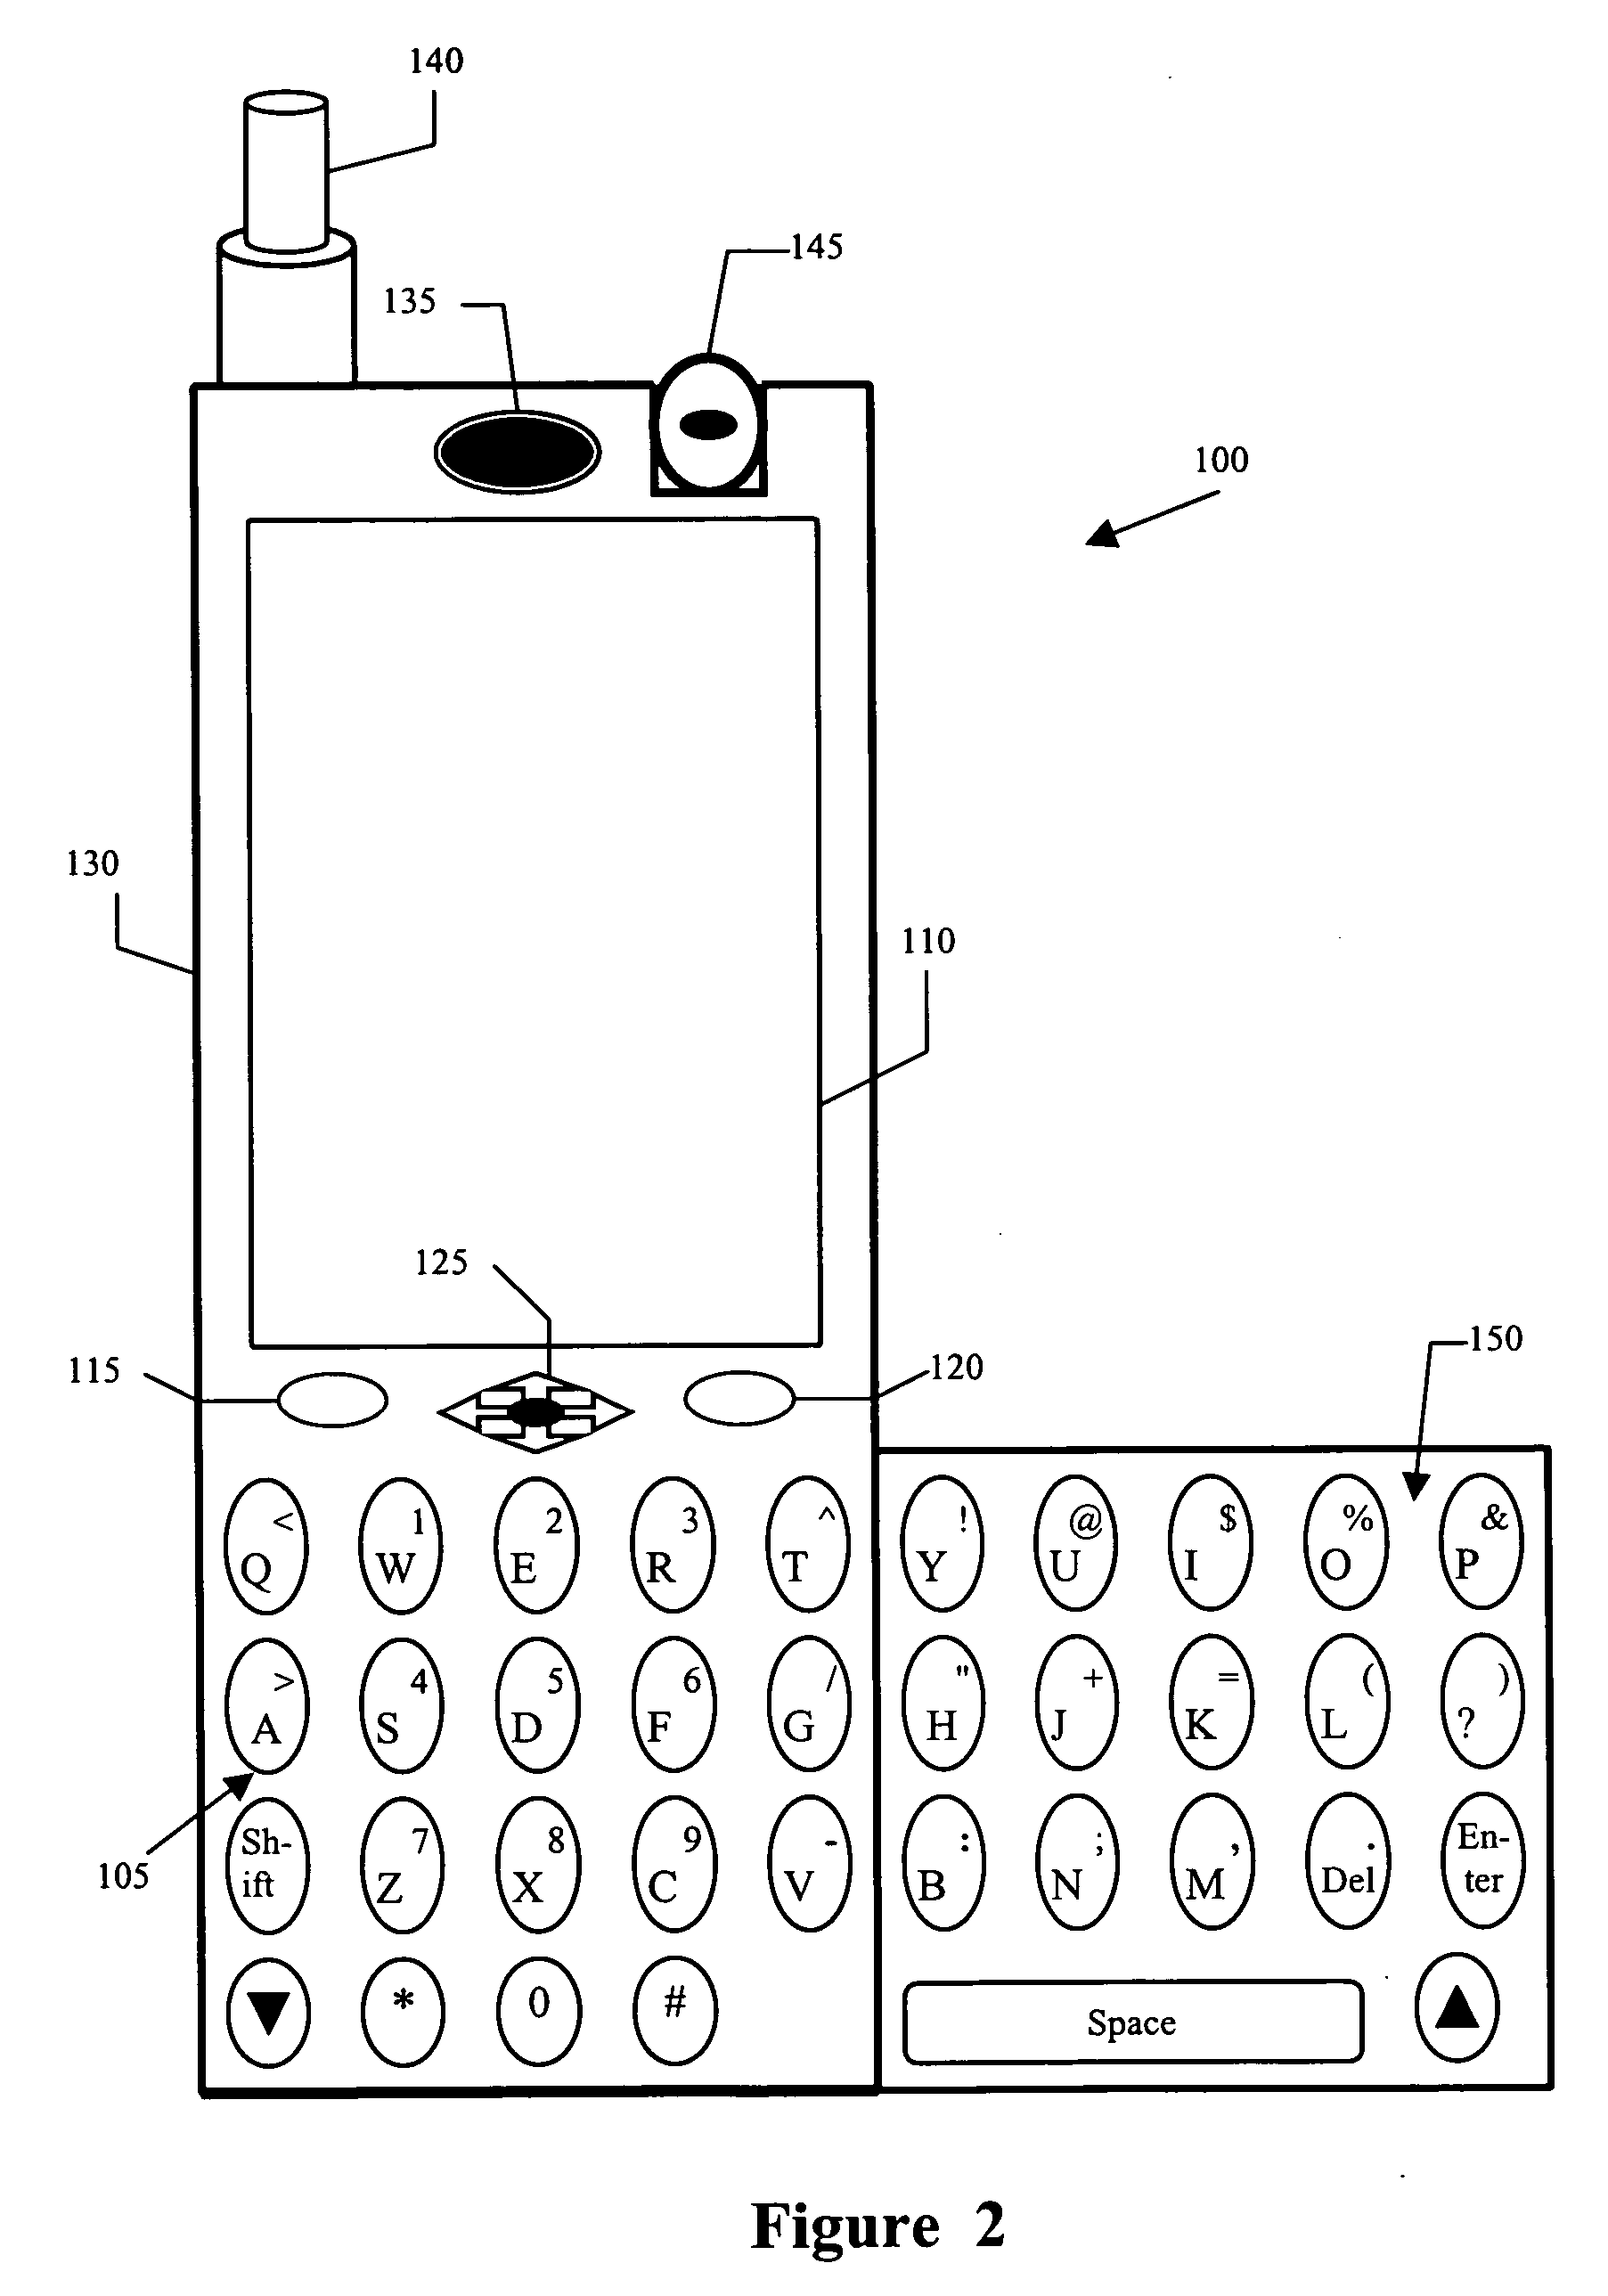 Full qwerty web-phone with optional second keypad